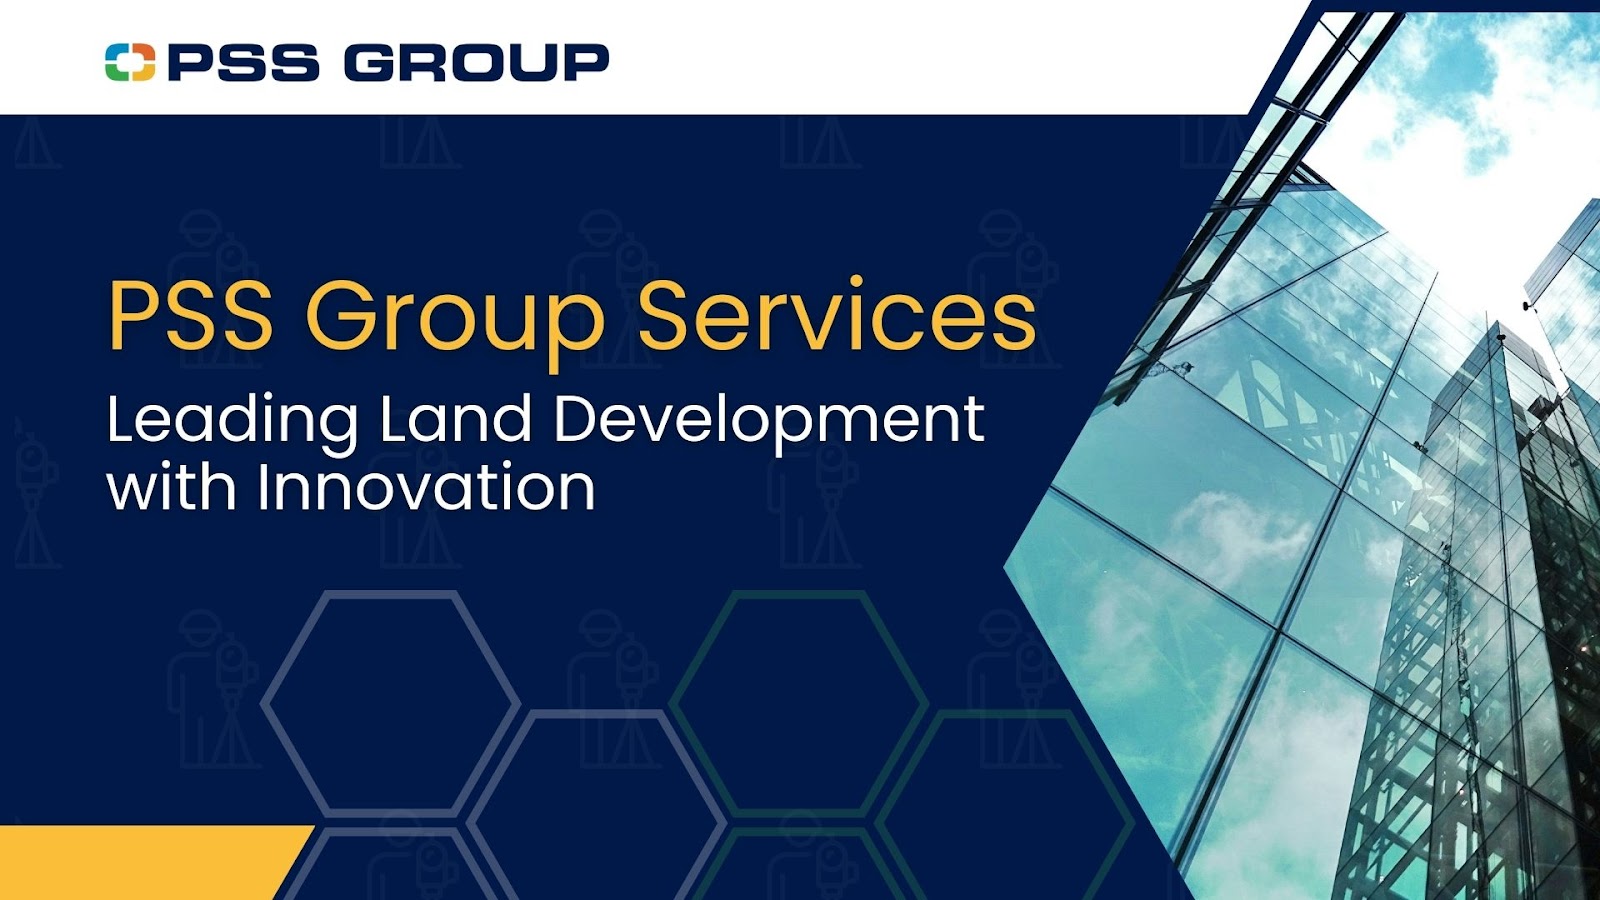 PSS Group Services Leading Land Development with Innovation